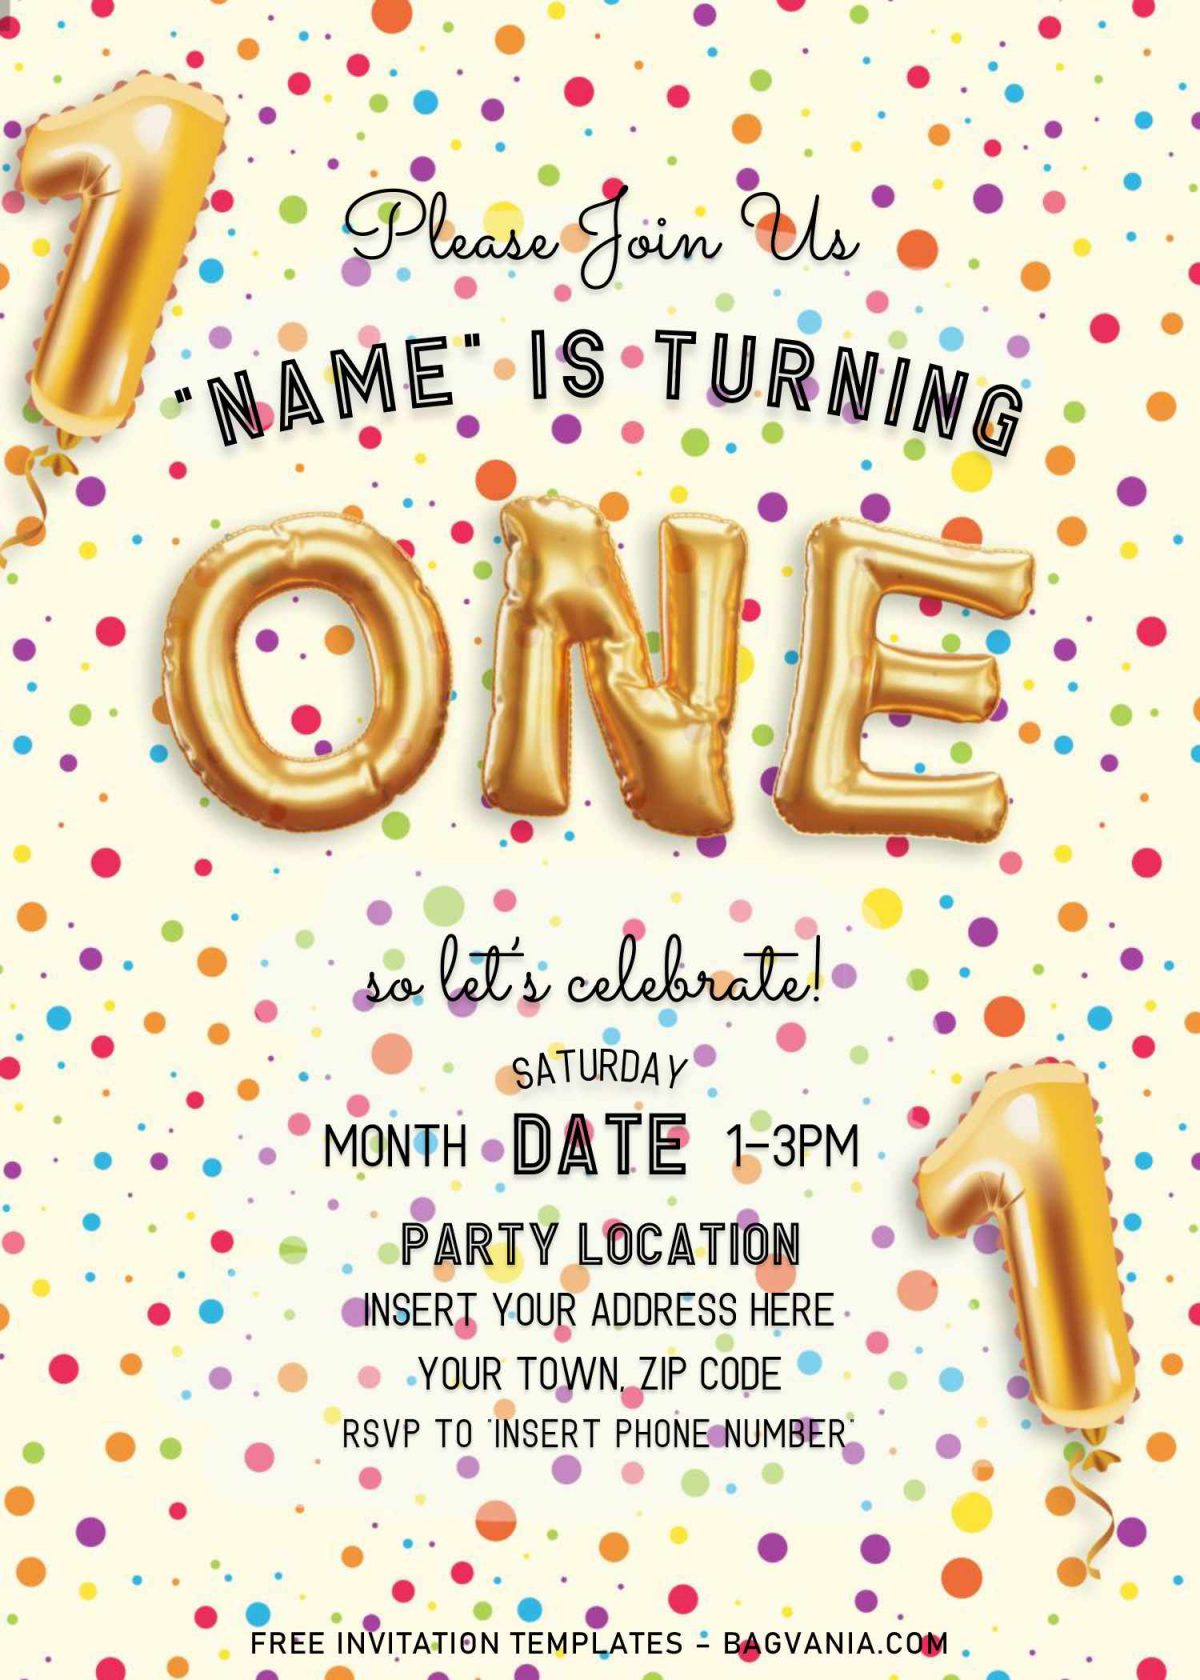 Free Balloons Themed Birthday Invitation Templates For Word and has gold balloons